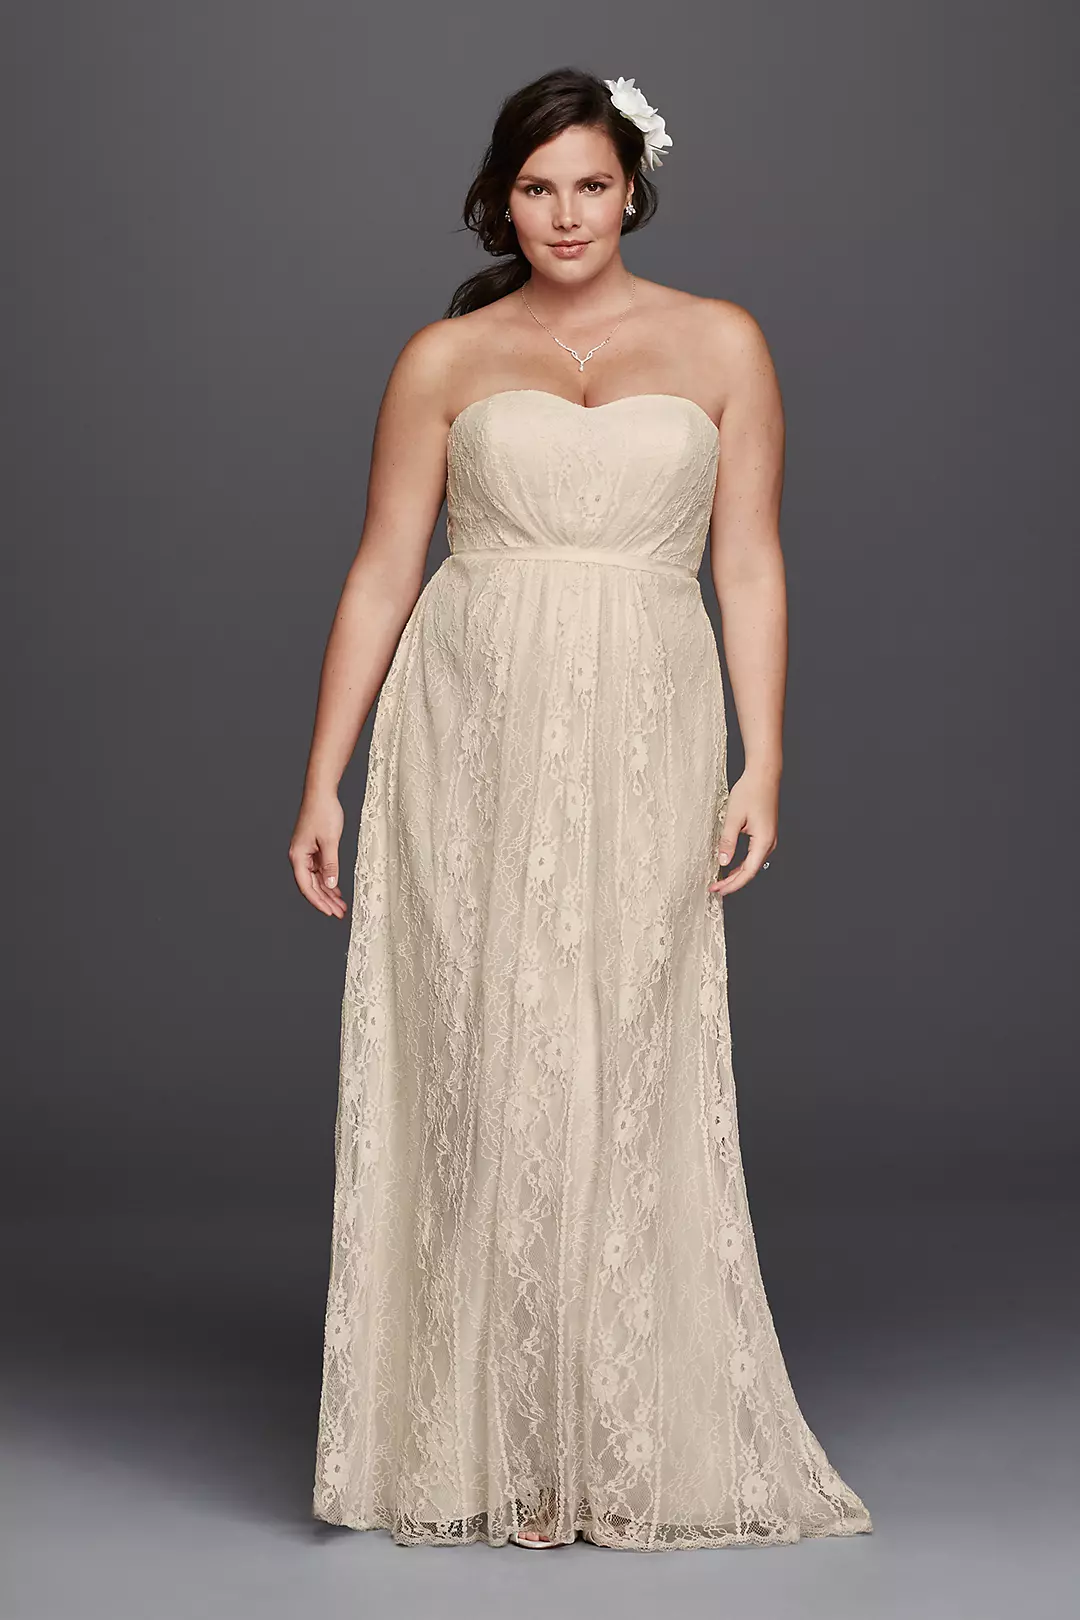 As-Is Linear Lace Overlay Plus Size Wedding Dress Image